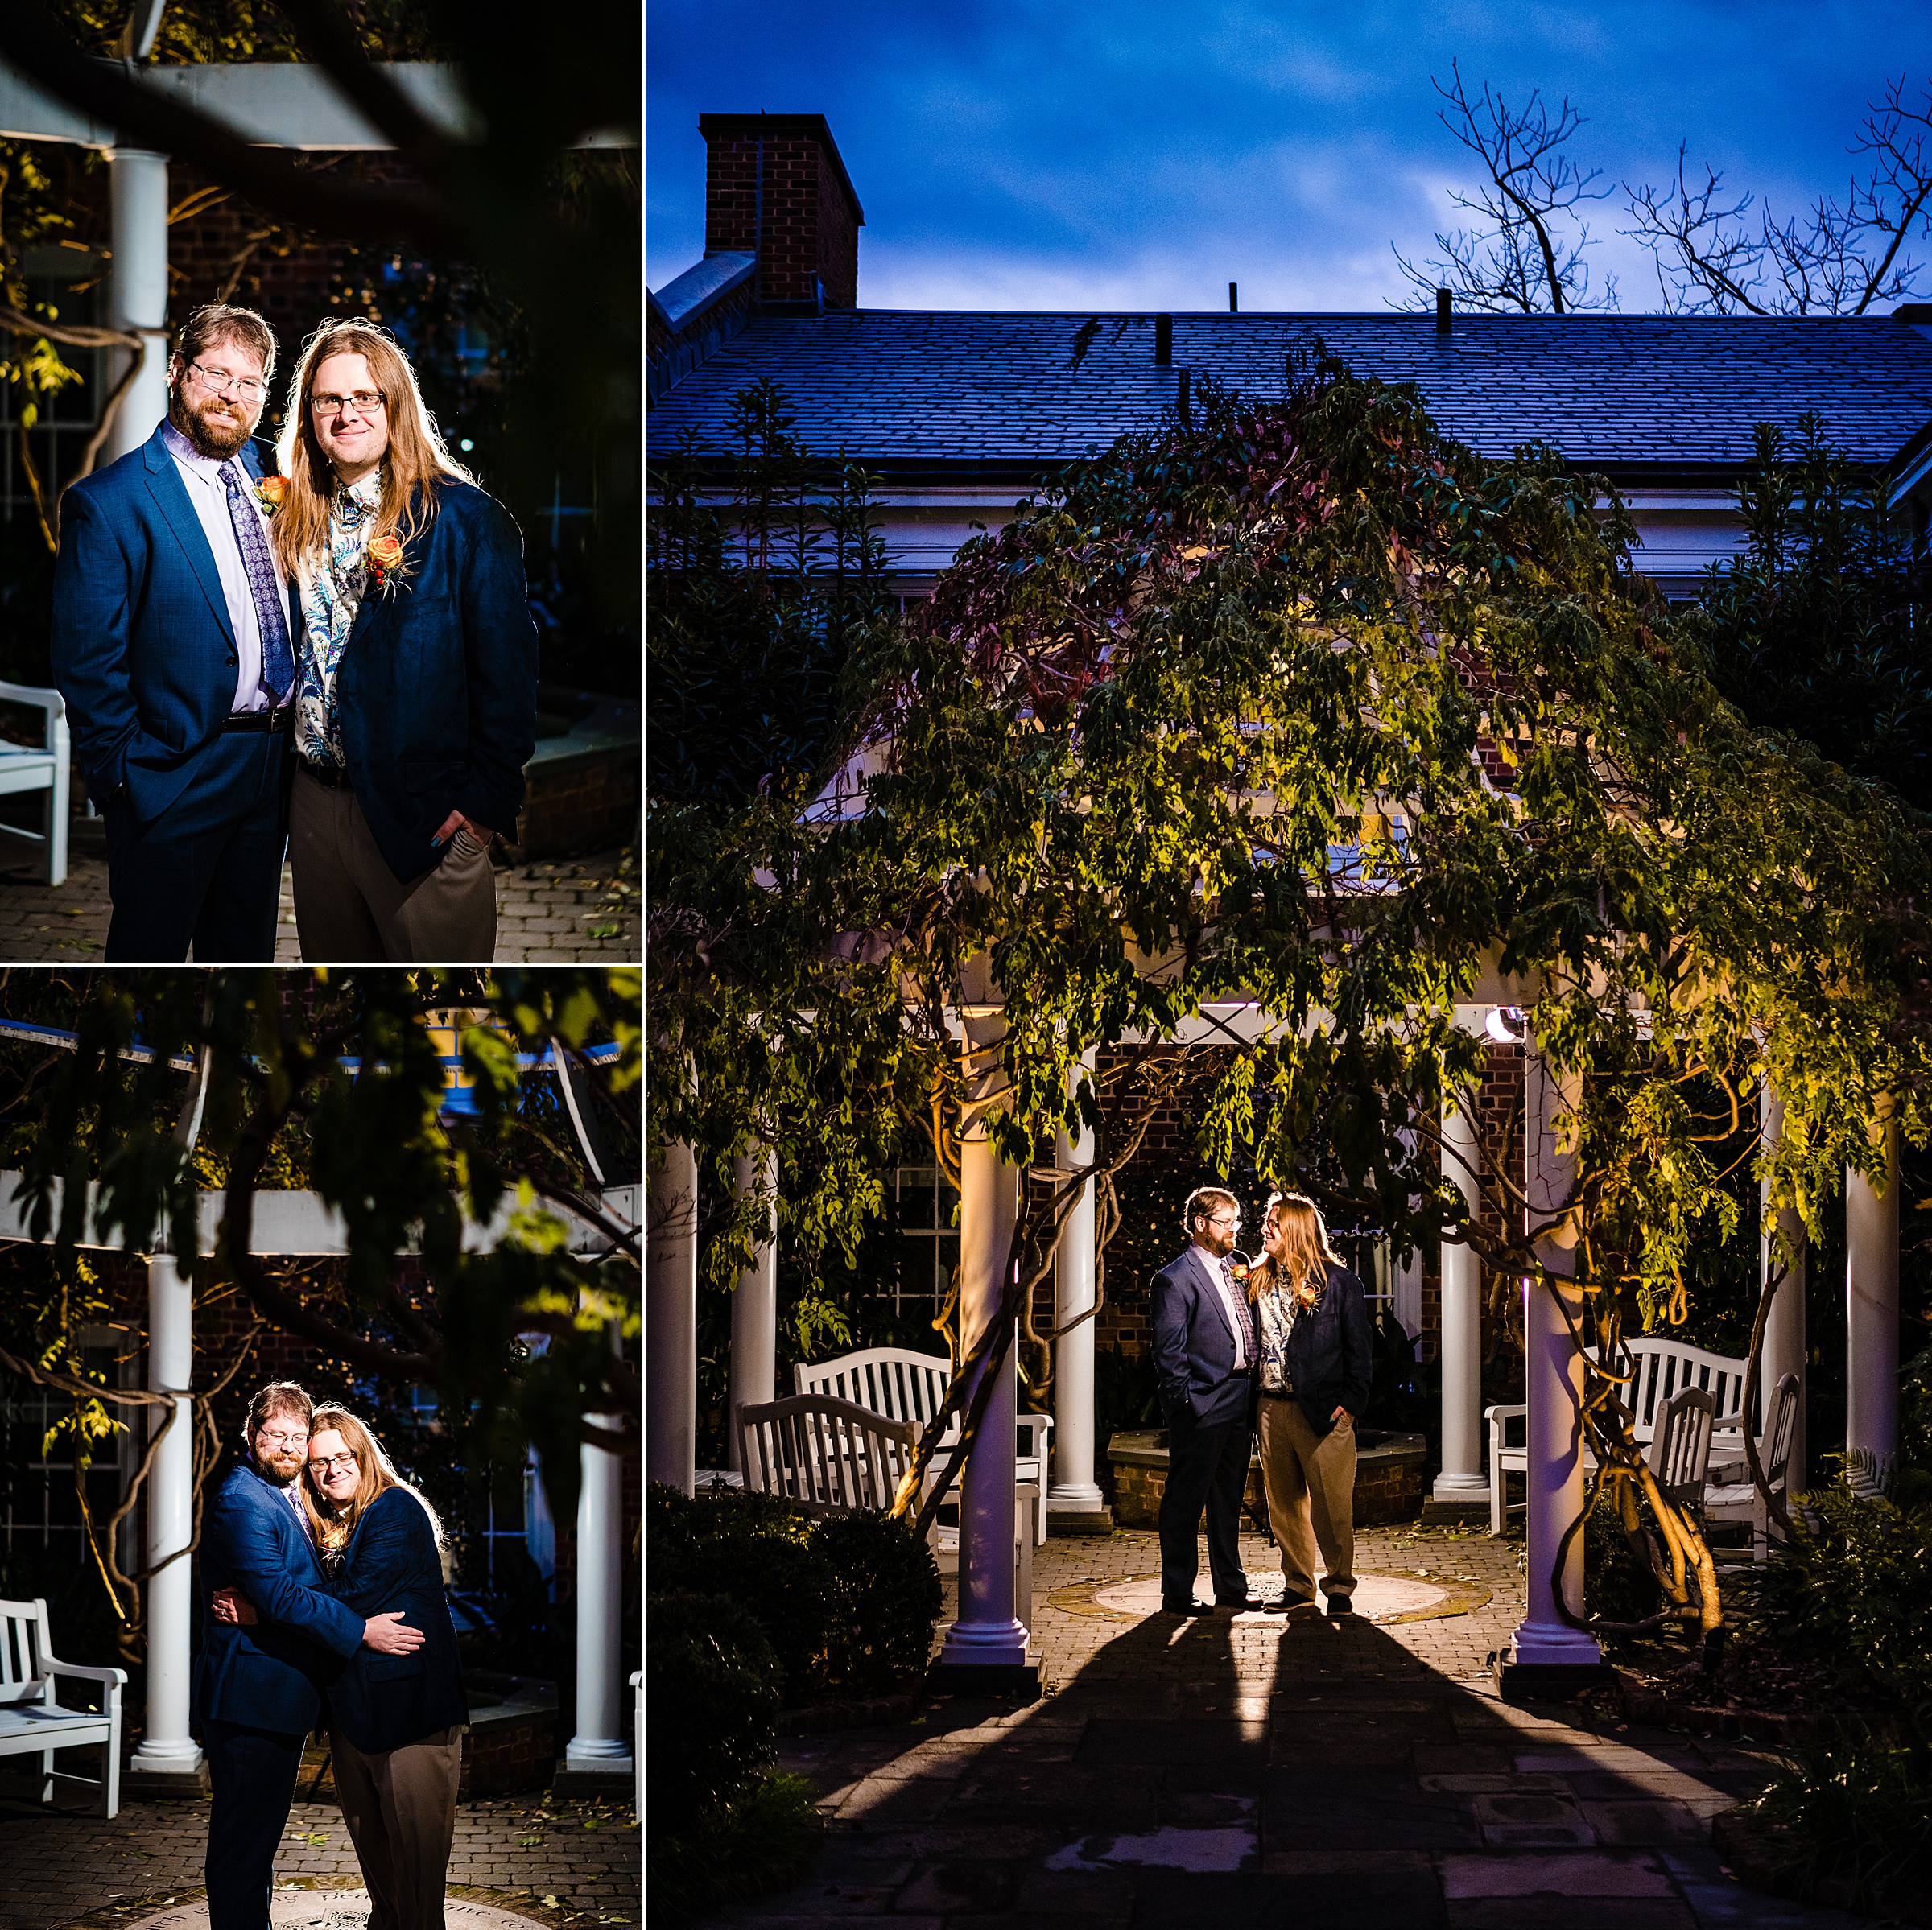 Nighttime portraits from Raleigh wedding photographers of two grooms after their Chapel Hill same-sex wedding